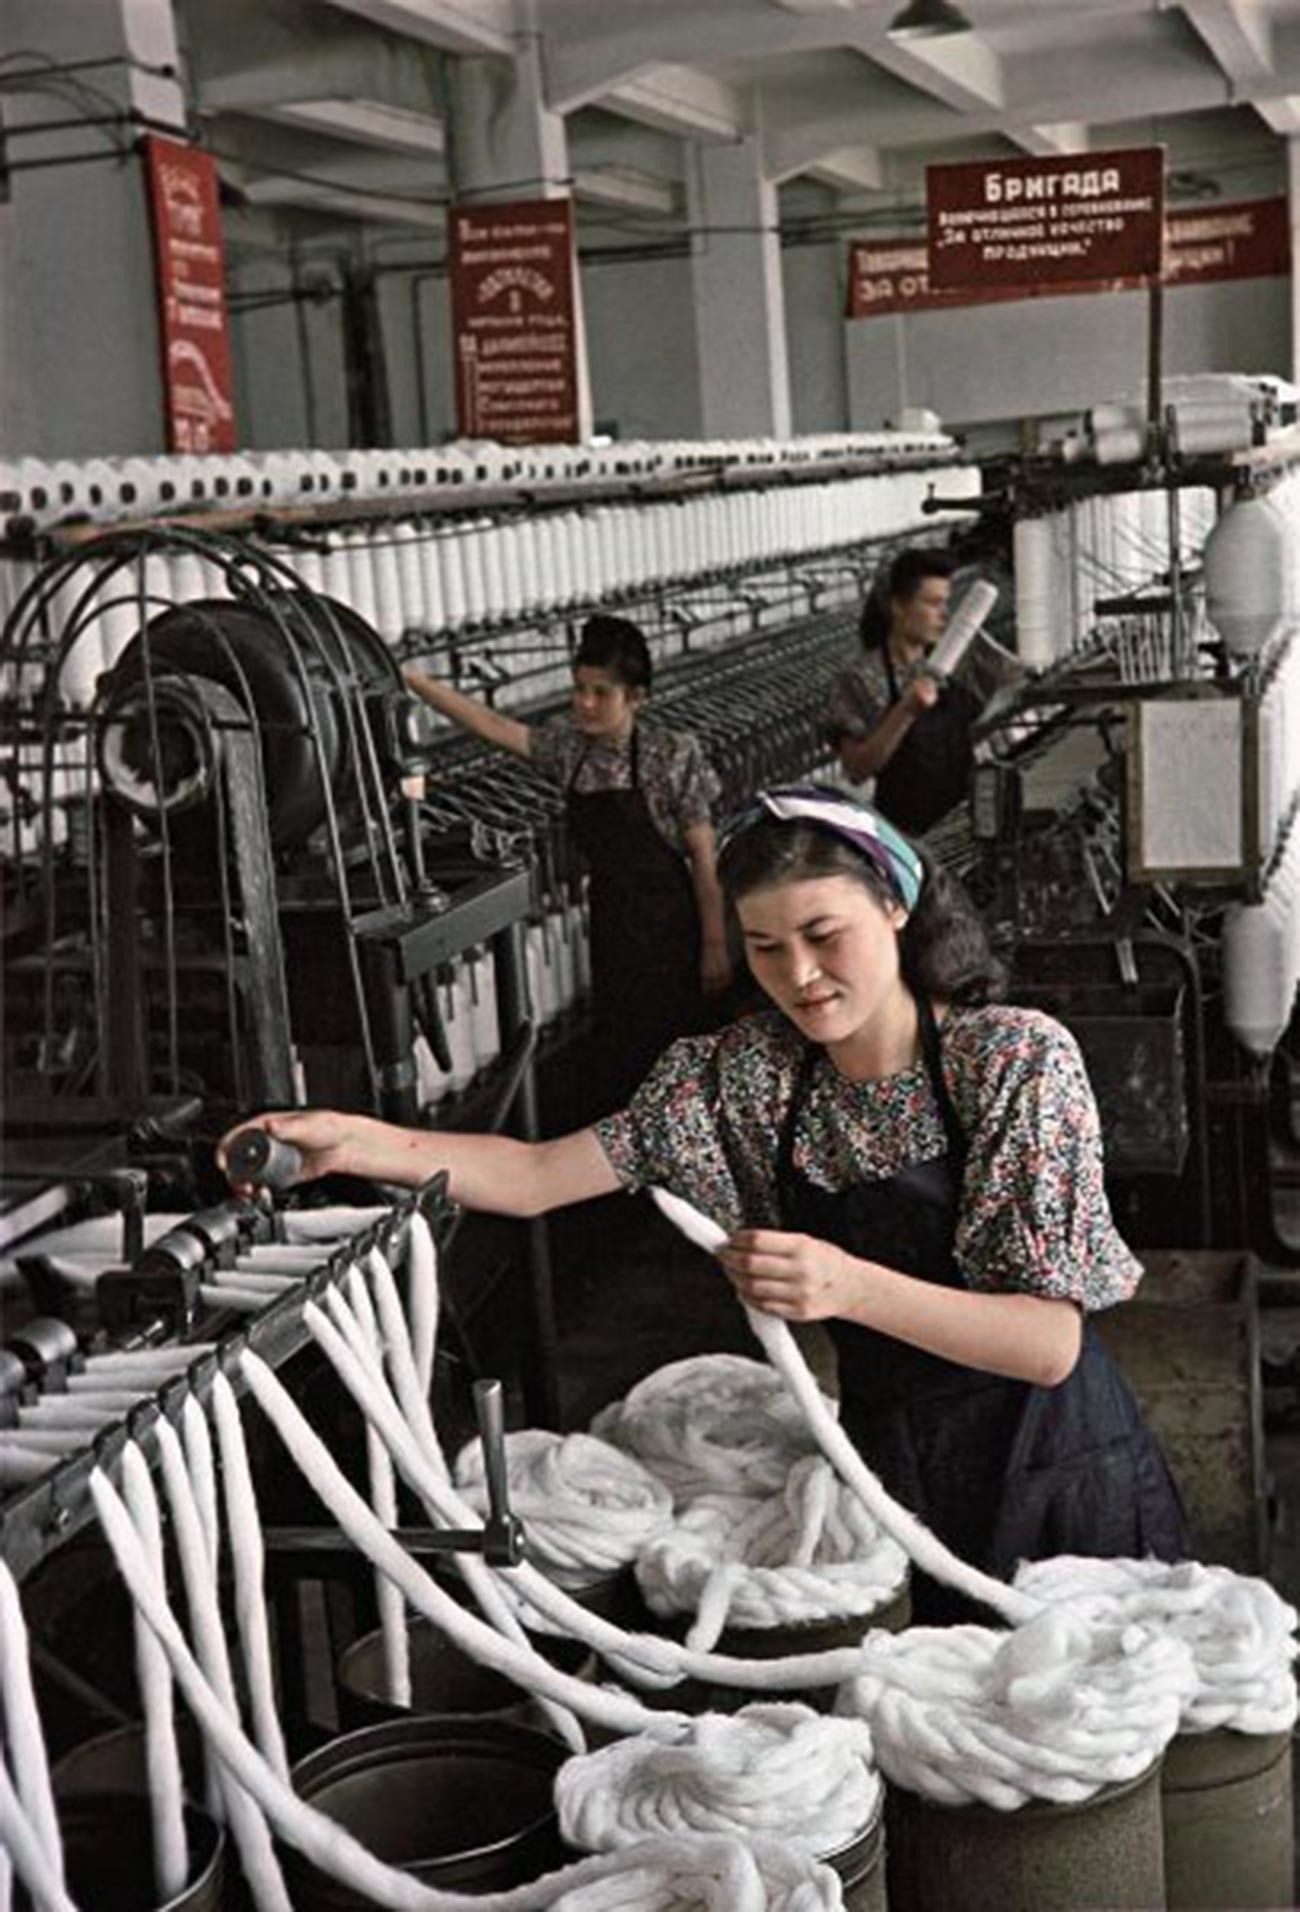 Stakhanovite Maria Nasilbayeva, a worker at the Alma-Ata cotton mill, grew up in an orphanage. Her team fulfills the production plan by 200 percent. From the archive of Ogonyok magazine; 1950.